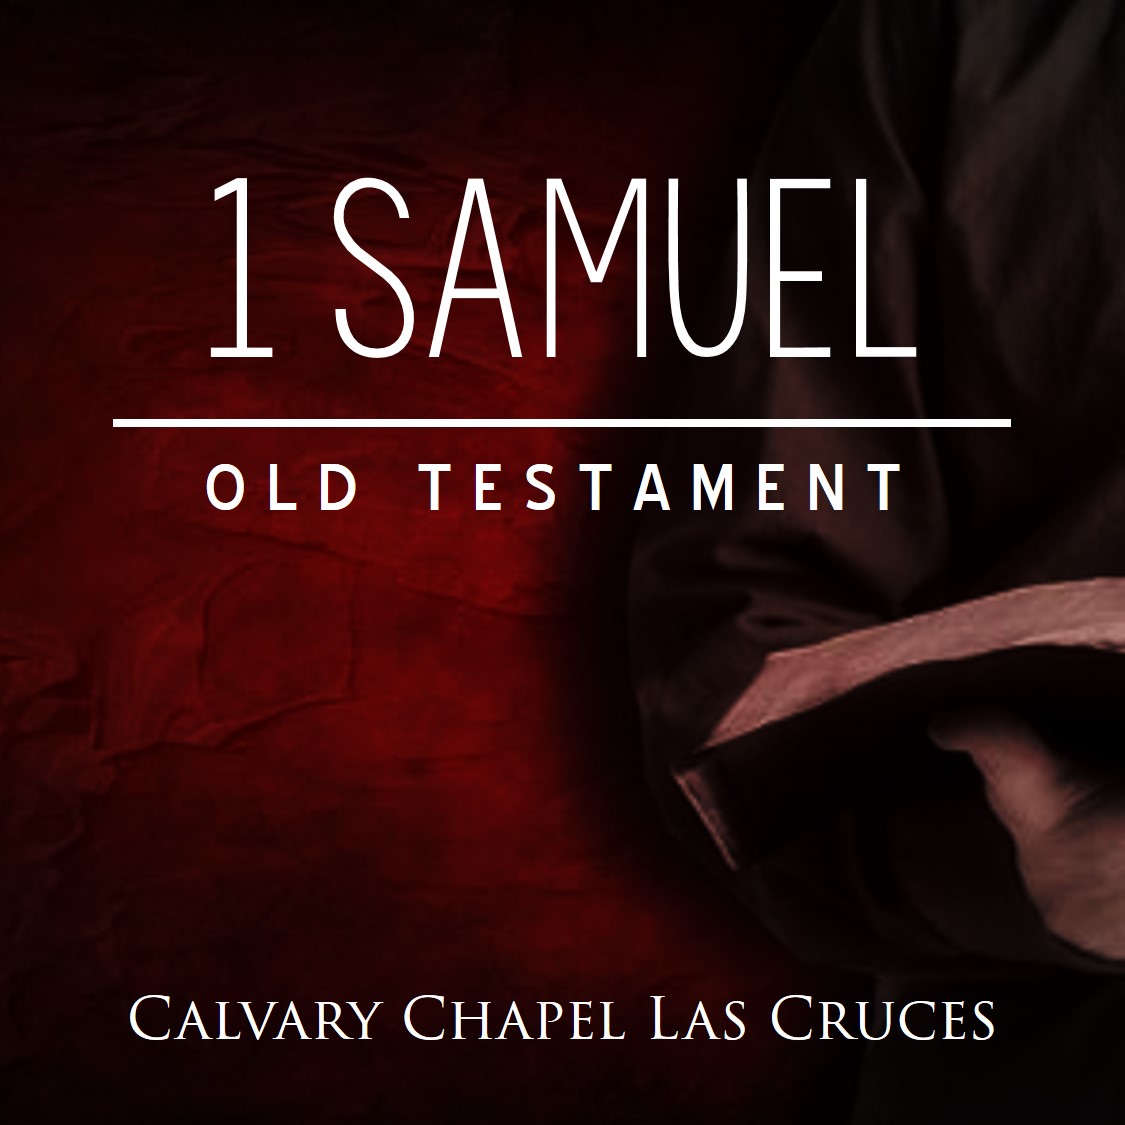 1 Samuel Chapters 22&23 - ”King Saul in His Rage & Hate Over David”